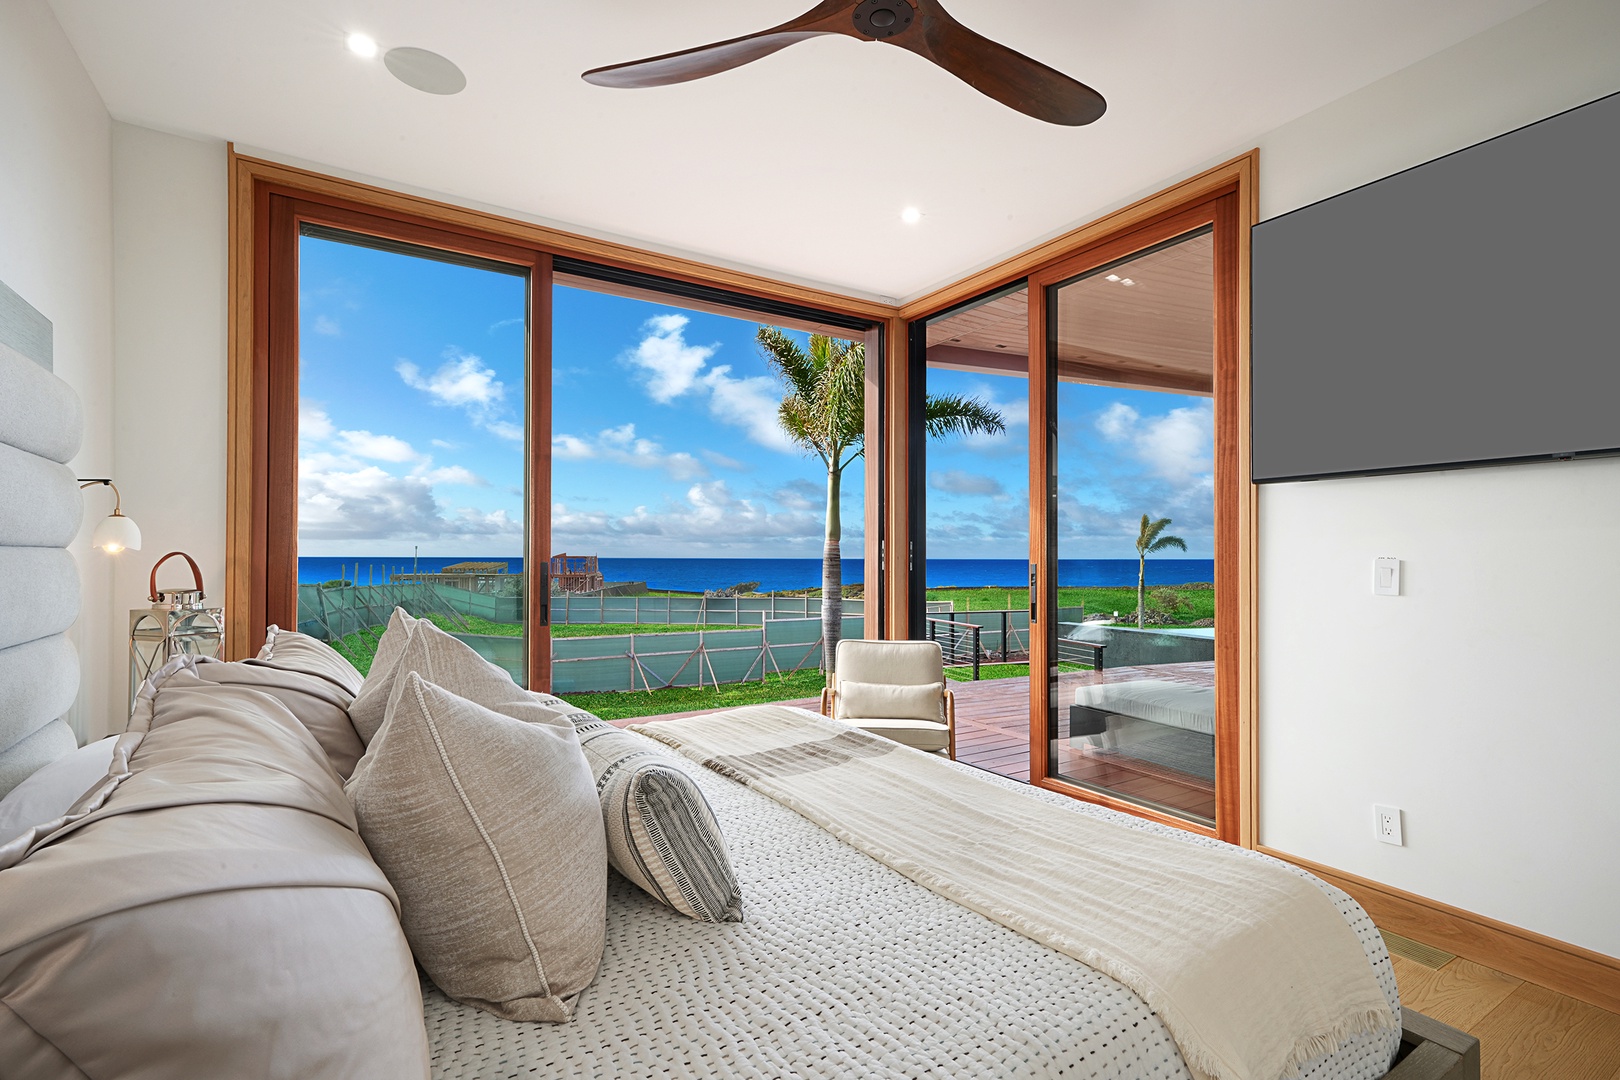 Koloa Vacation Rentals, Hale Makau - The primary suite with TV, large windows and direct access to the lanai.